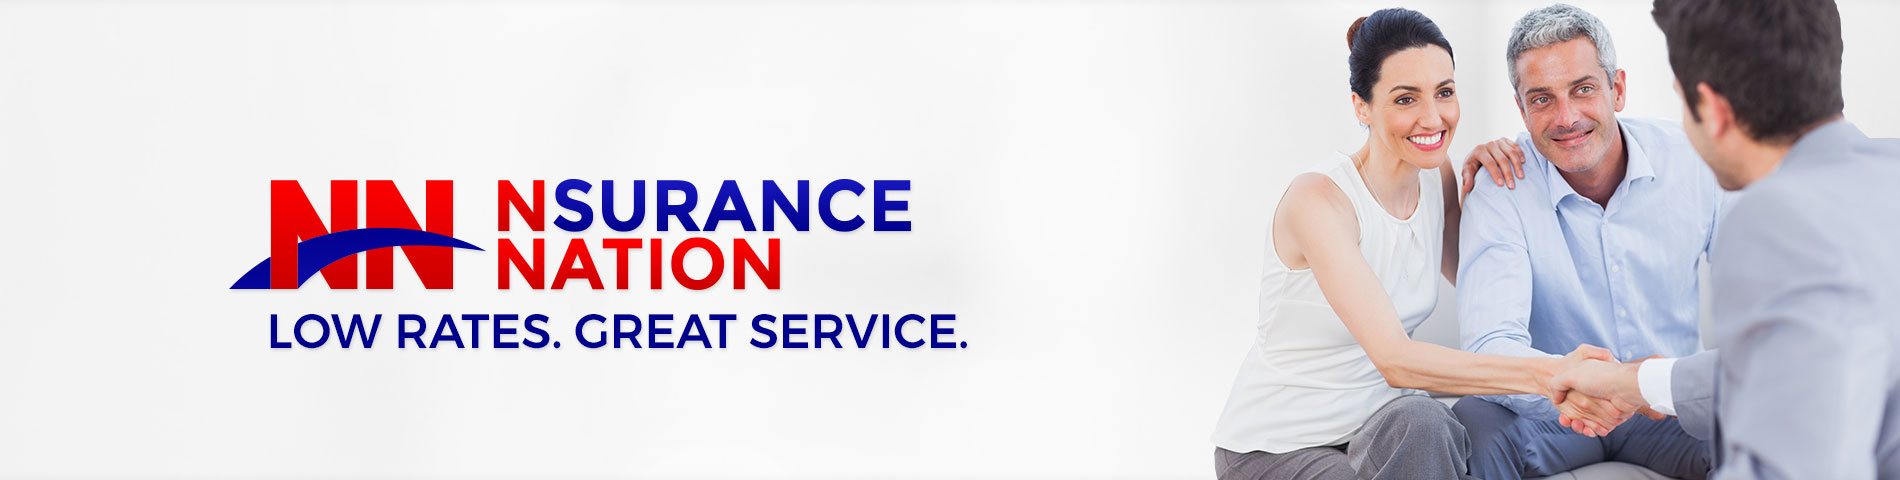 Why Nsurance Nation?